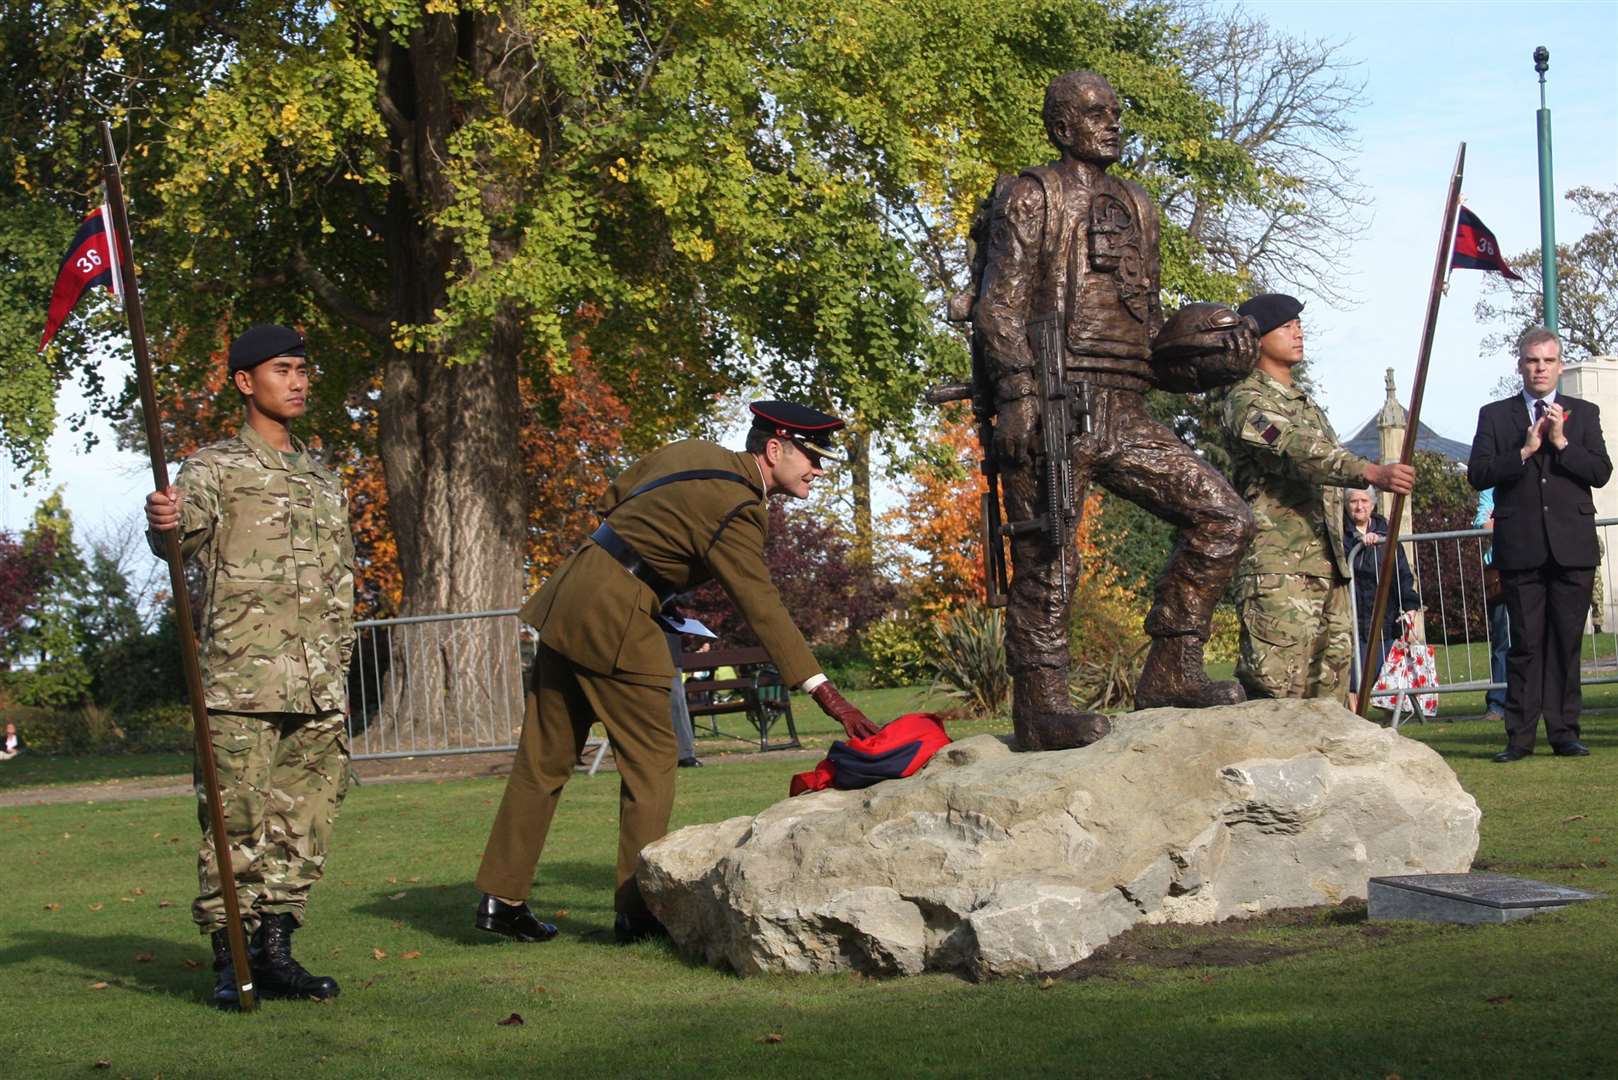 Lt Col Simon Hulme unveiling the statue in 2011. Picture by: John Westhrop